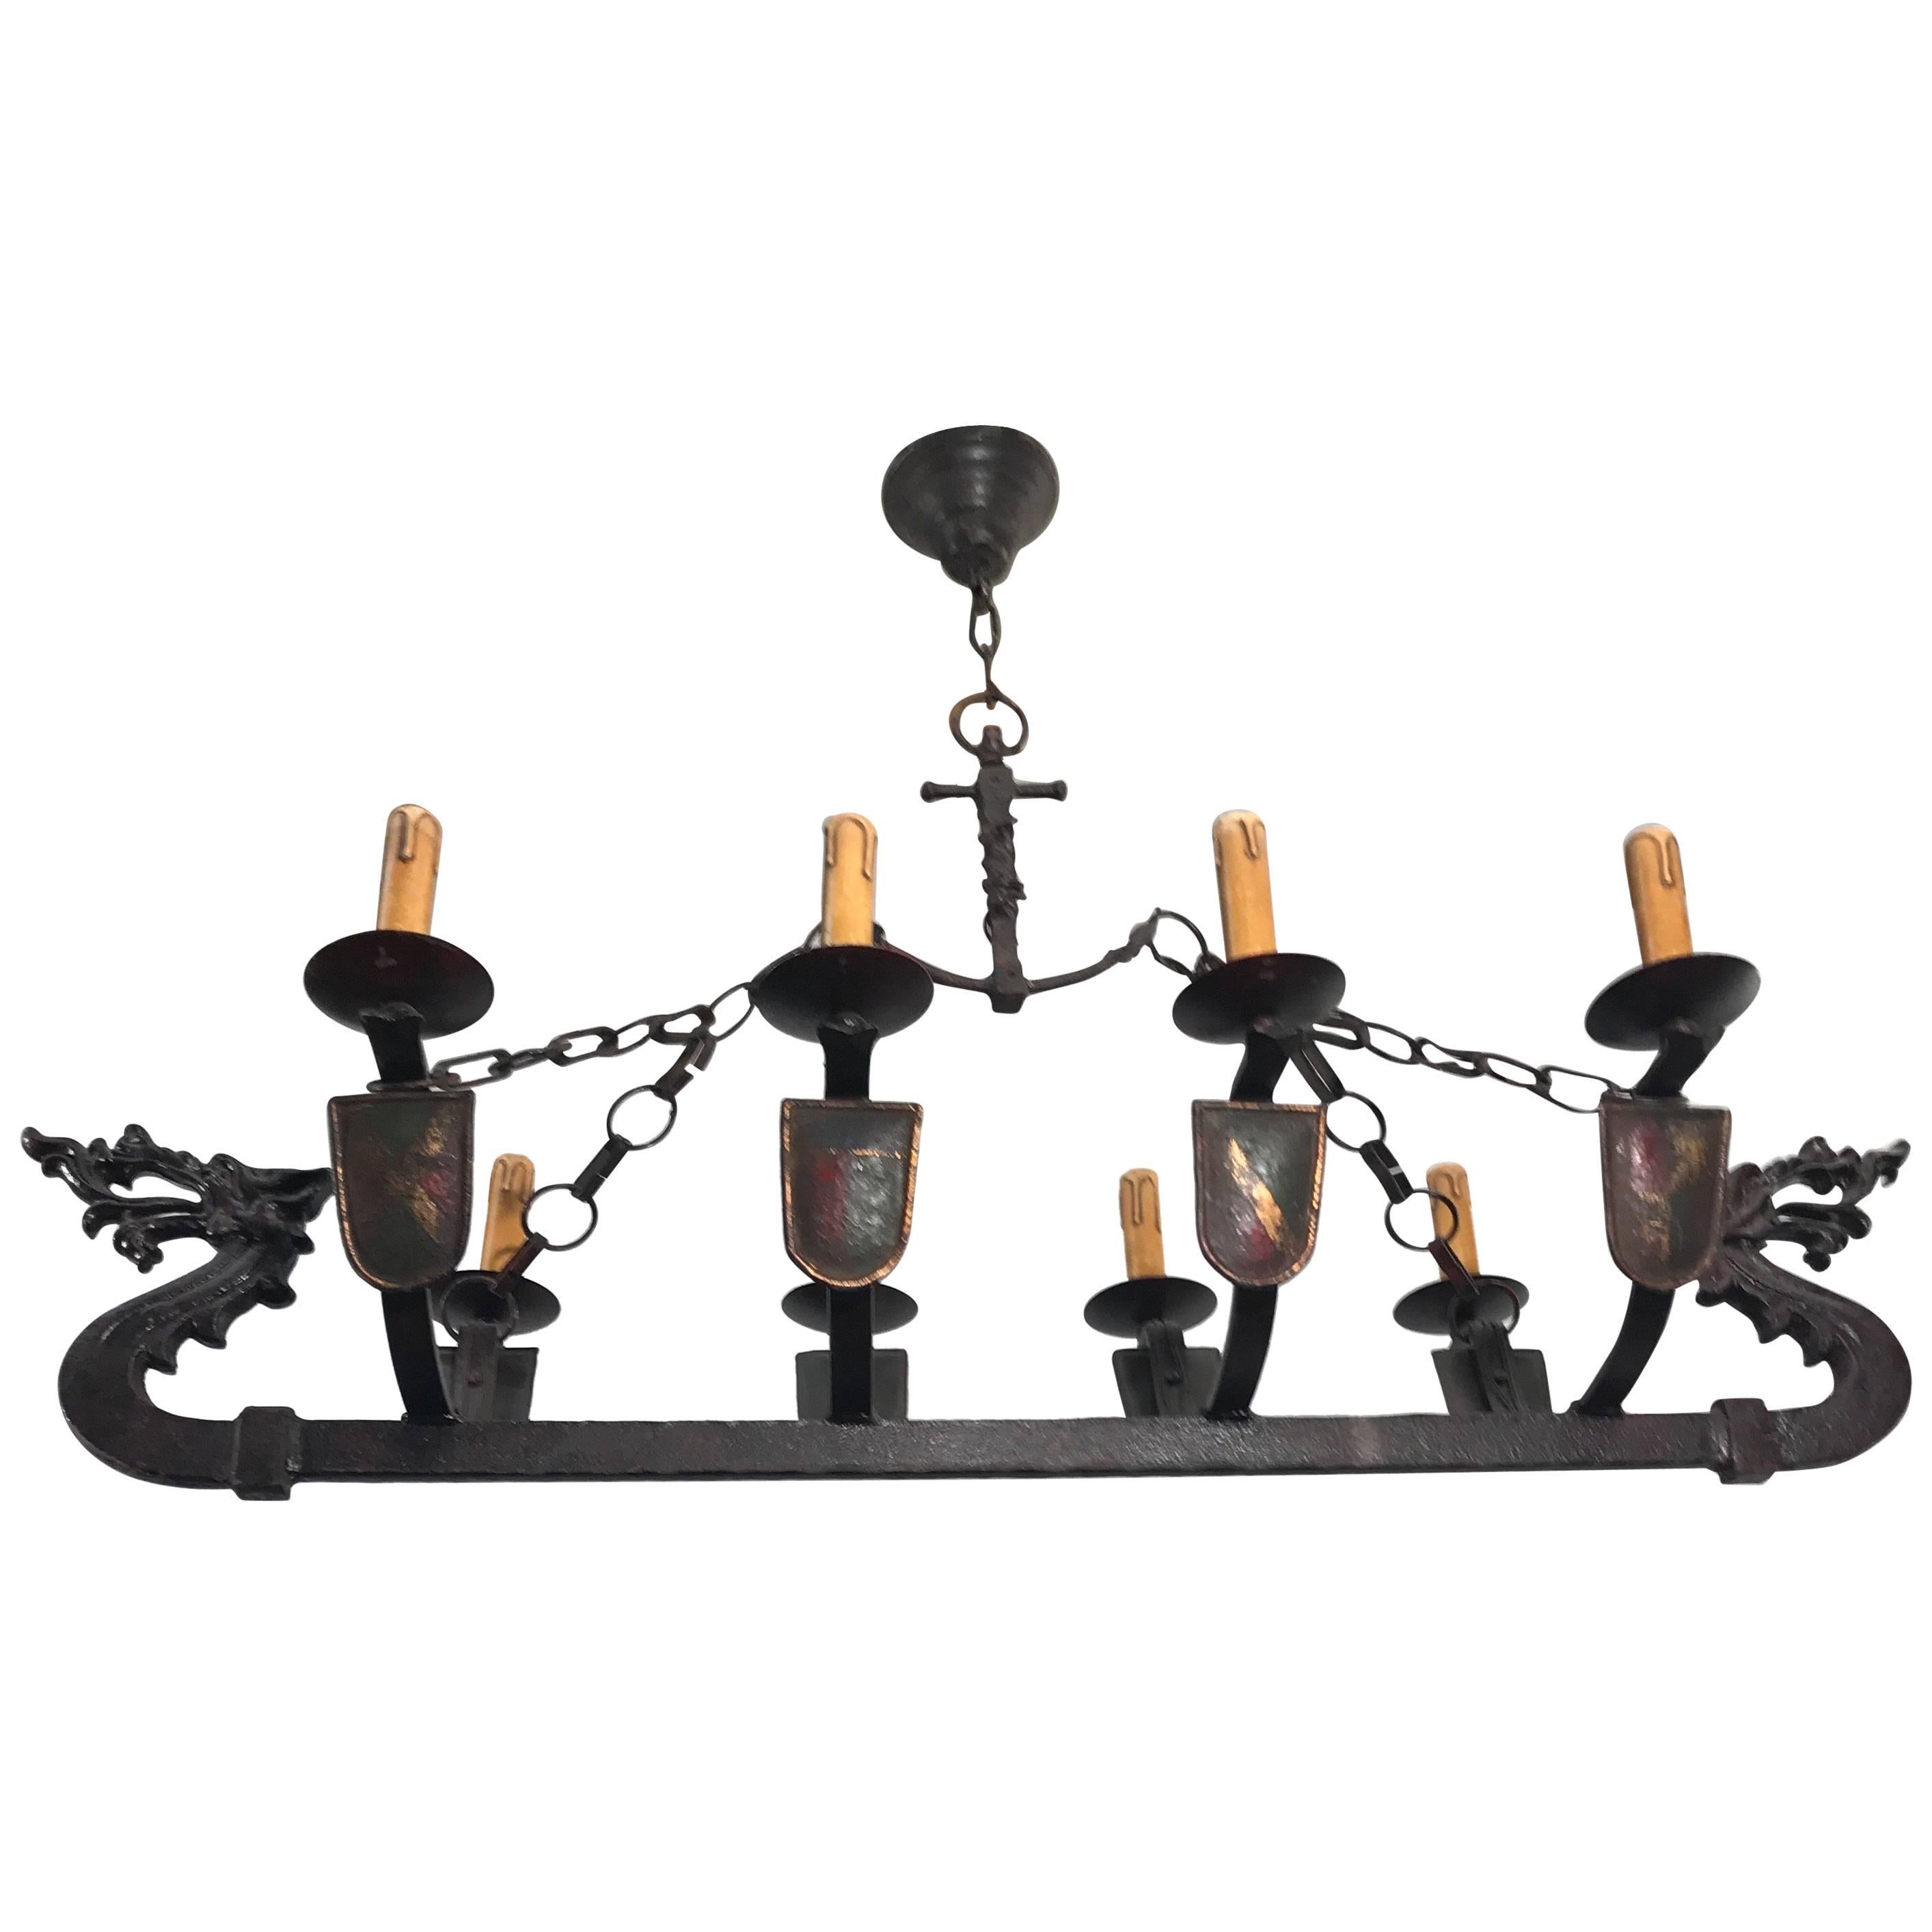 Wrought Iron Medieval St. Viking Longboat Chandelier, Pendant Light with Dragons